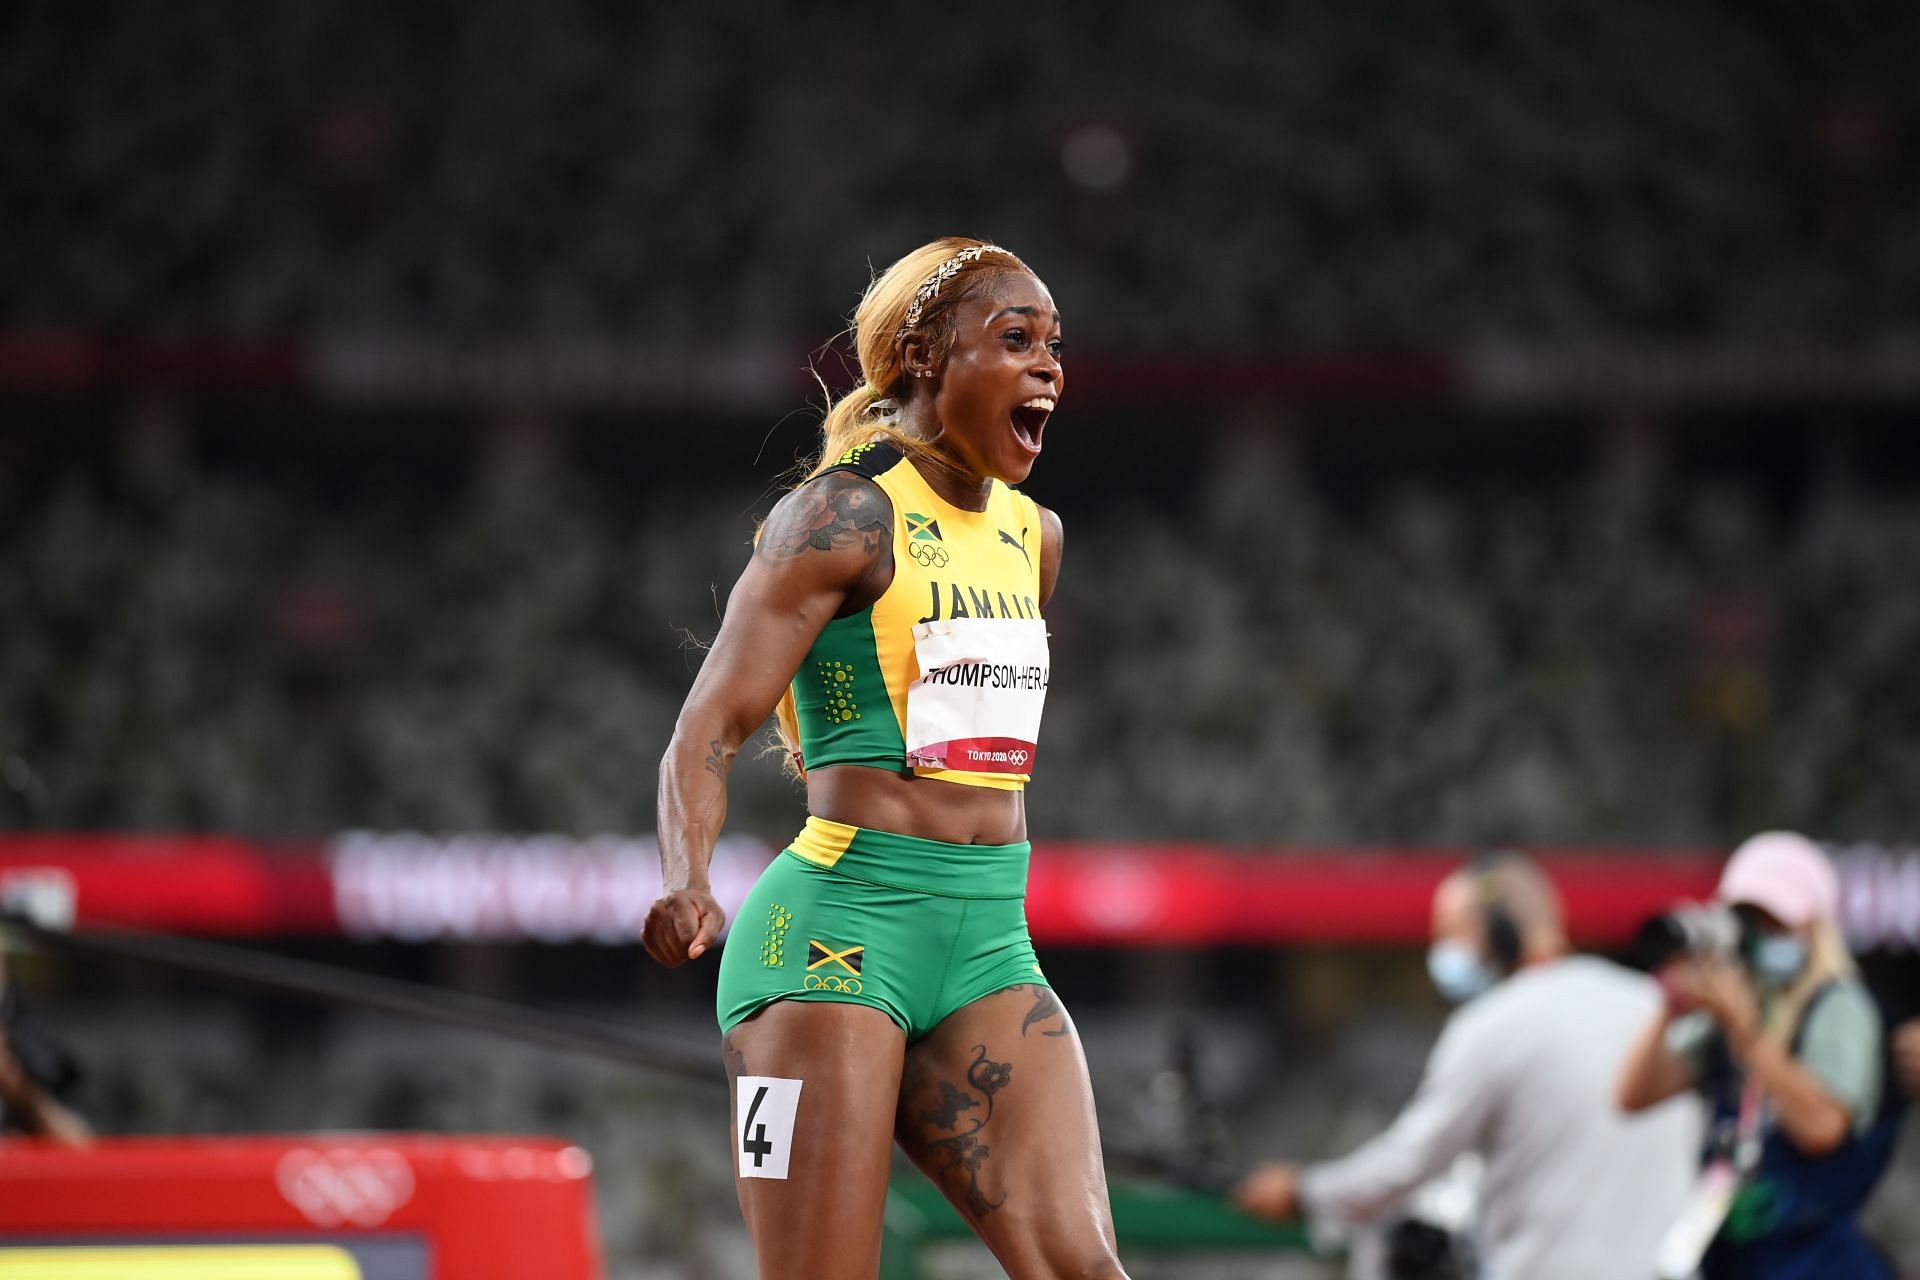 Elaine Thompson-Herah at the Tokyo 2020 Olympic Games. (Photo by Matthias Hangst/Getty Images)